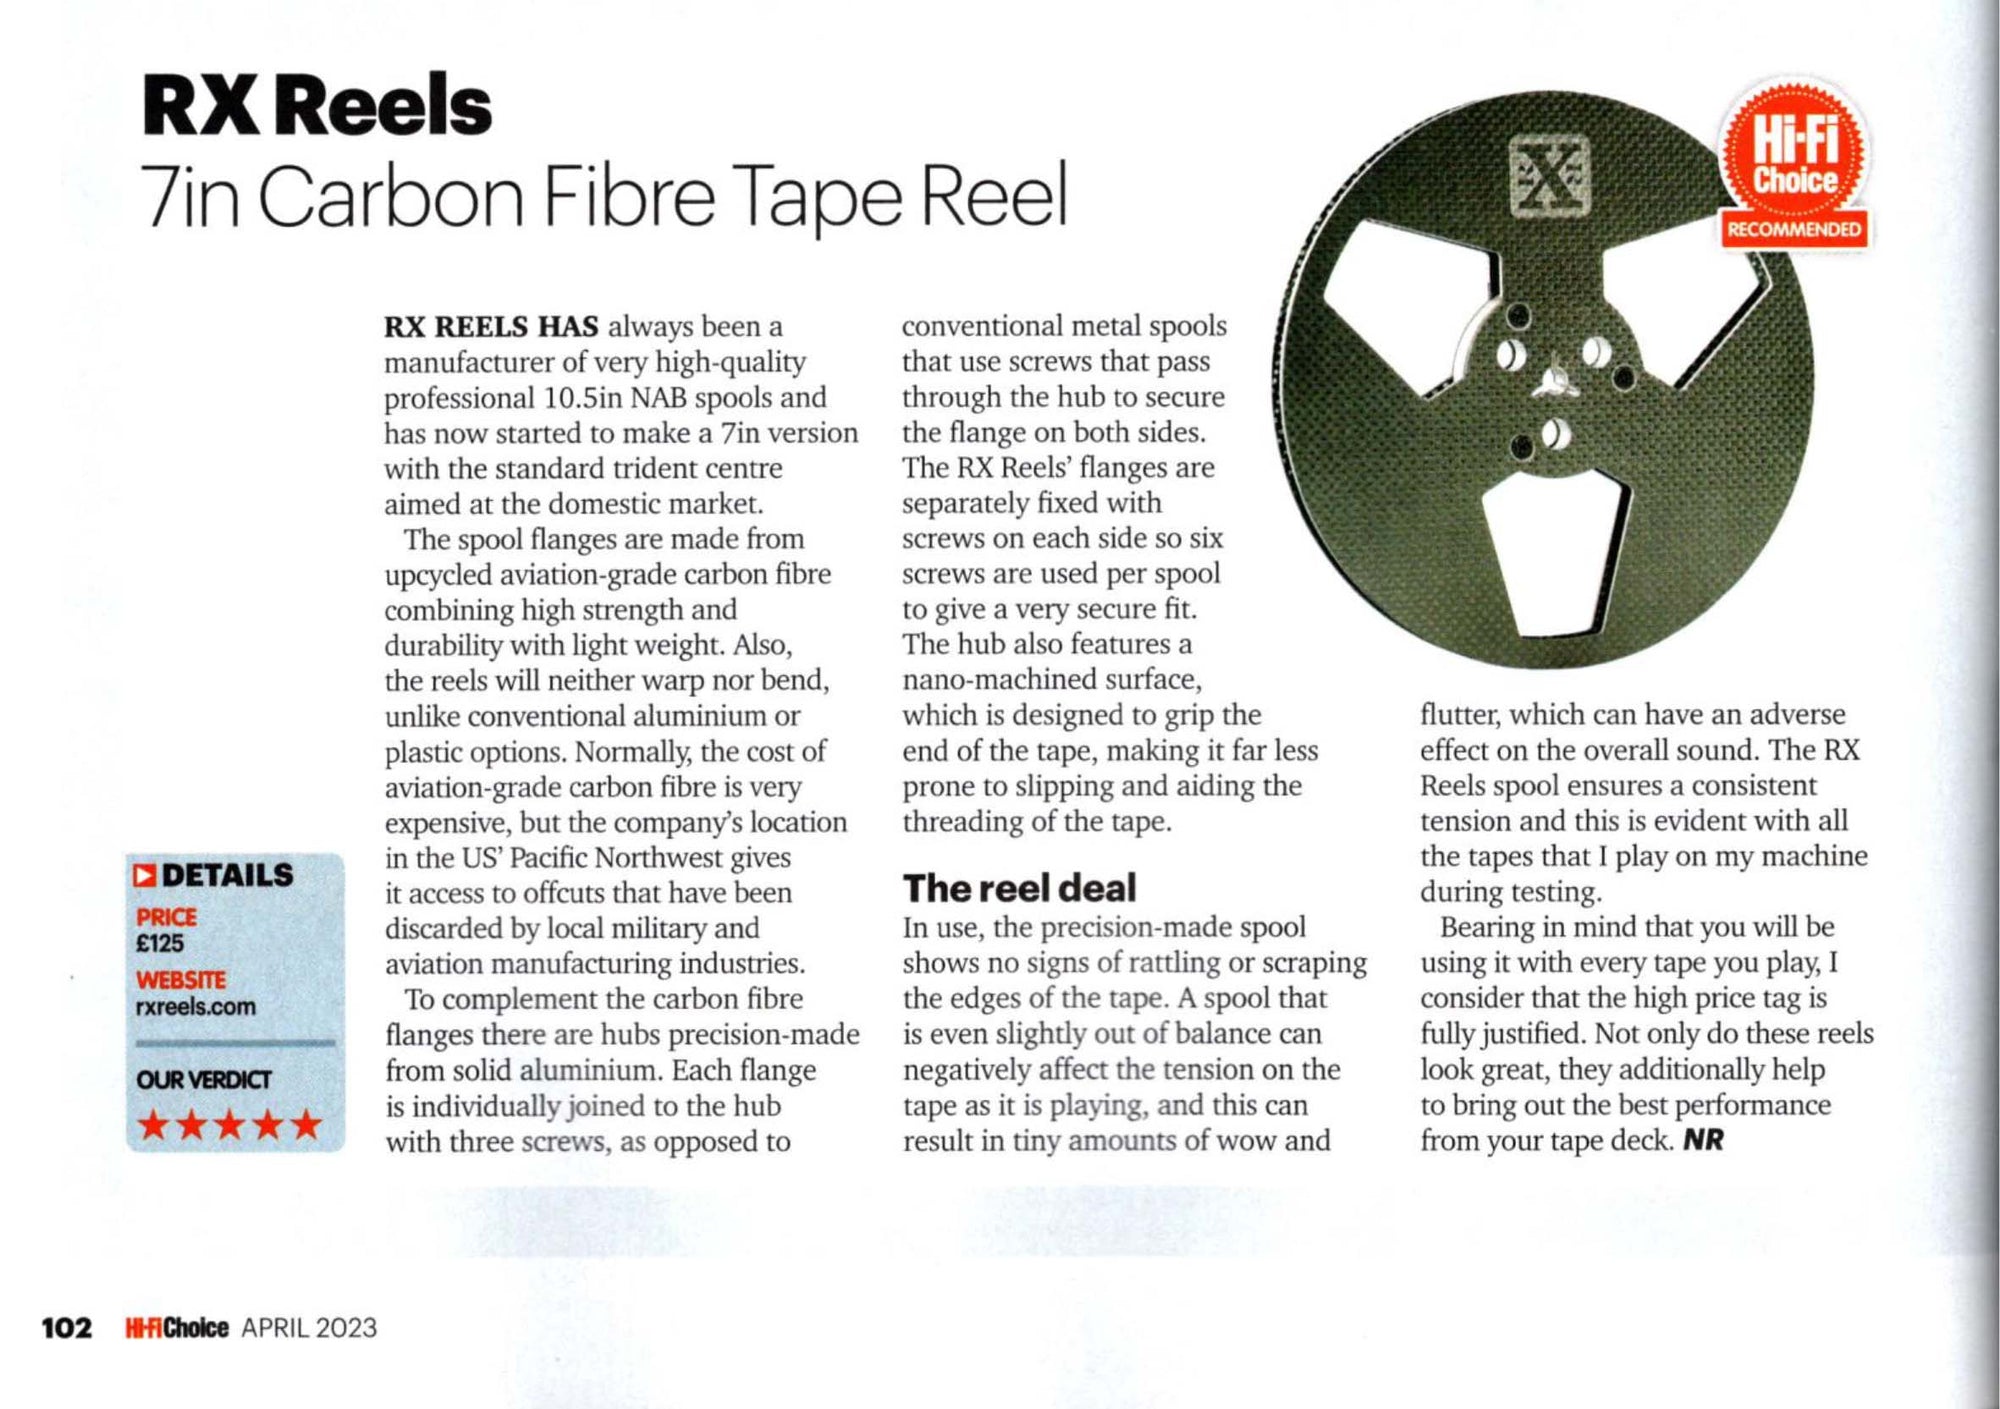 Five-star Review from Hi-Fi Choice Has Us Spinning!